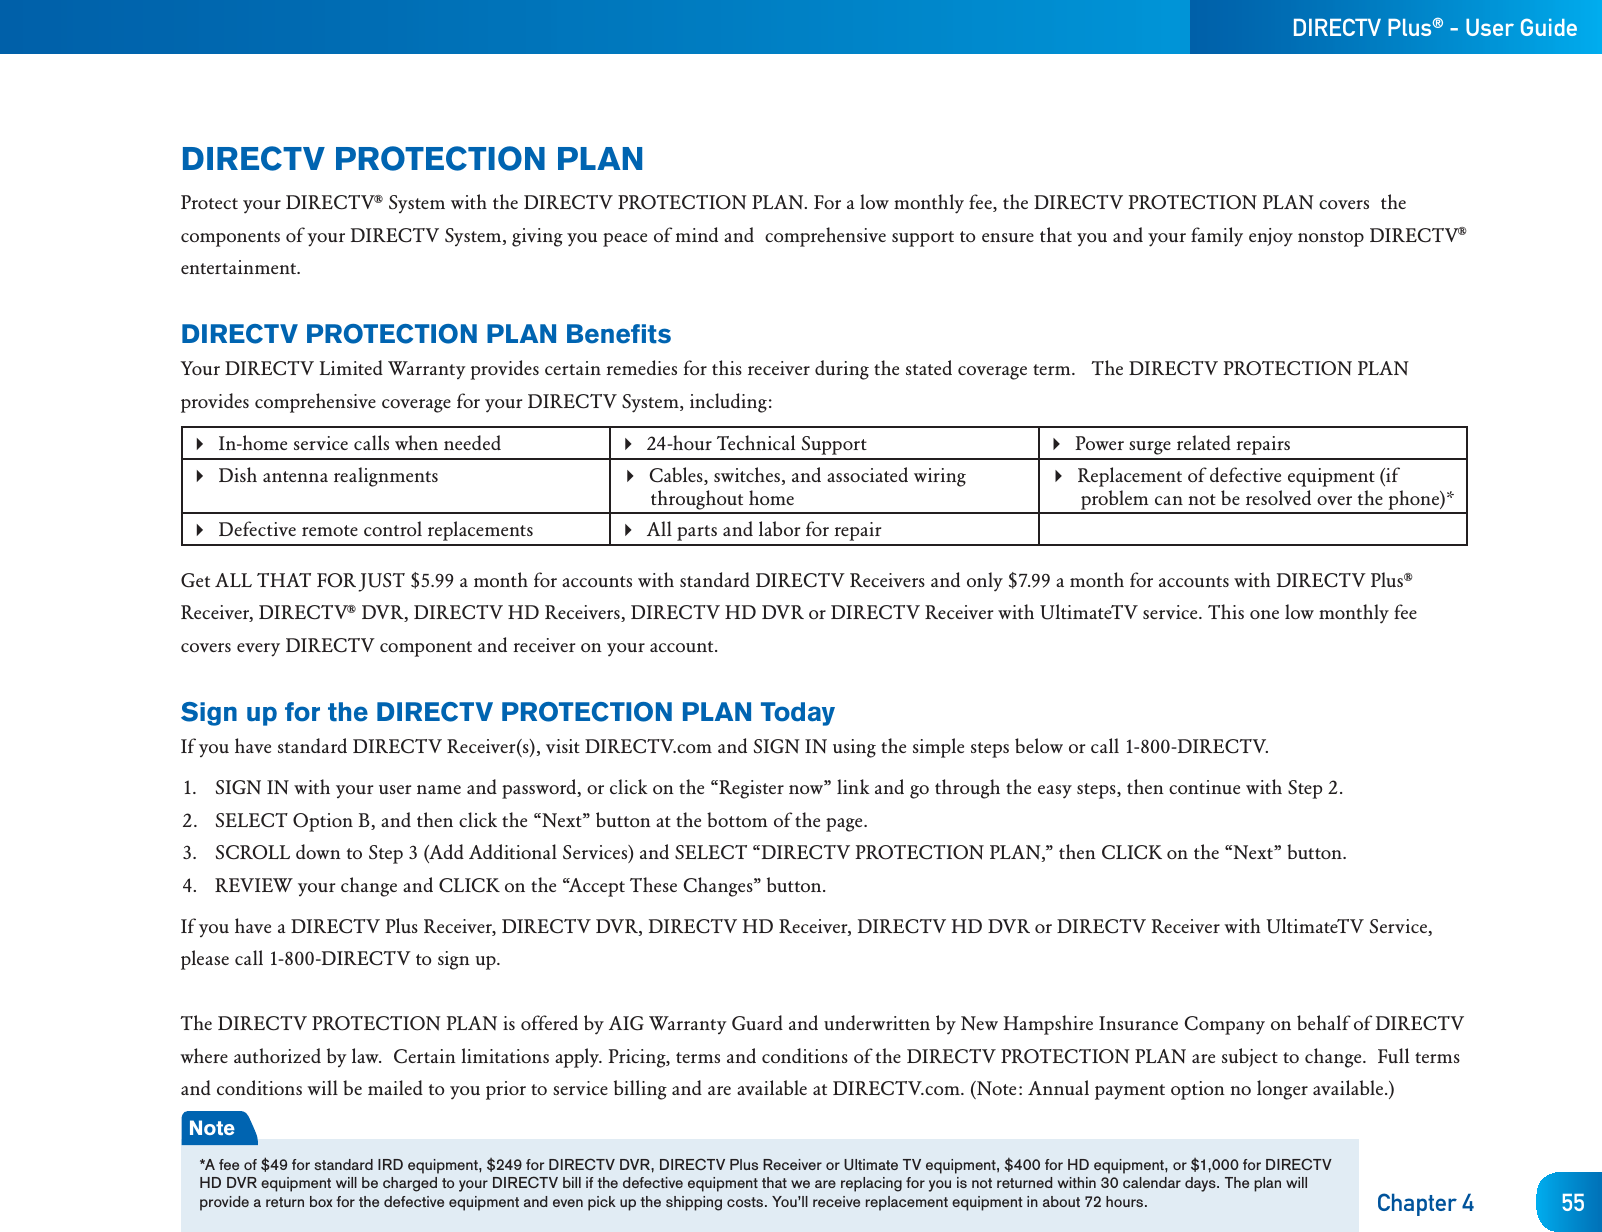 DIRECTV Plus® - User GuideChapter 4 55DIRECTV PROTECTION PLANProtect your DIRECTV® System with the DIRECTV PROTECTION PLAN. For a low monthly fee, the DIRECTV PROTECTION PLAN covers  the components of your DIRECTV System, giving you peace of mind and  comprehensive support to ensure that you and your family enjoy nonstop DIRECTV®entertainment.DIRECTV PROTECTION PLAN BenefitsYour DIRECTV Limited Warranty provides certain remedies for this receiver during the stated coverage term.   The DIRECTV PROTECTION PLAN provides comprehensive coverage for your DIRECTV System, including: In-home service calls when needed  24-hour Technical Support Power surge related repairs Dish antenna realignments  Cables, switches, and associated wiring throughout homeReplacement of defective equipment (if problem can not be resolved over the phone)*Defective remote control replacements All parts and labor for repairGet ALL THAT FOR JUST $5.99 a month for accounts with standard DIRECTV Receivers and only $7.99 a month for accounts with DIRECTV Plus®Receiver, DIRECTV® DVR, DIRECTV HD Receivers, DIRECTV HD DVR or DIRECTV Receiver with UltimateTV service. This one low monthly fee covers every DIRECTV component and receiver on your account.Sign up for the DIRECTV PROTECTION PLAN TodayIf you have standard DIRECTV Receiver(s), visit DIRECTV.com and SIGN IN using the simple steps below or call 1-800-DIRECTV.1.  SIGN IN with your user name and password, or click on the “Register now” link and go through the easy steps, then continue with Step 2.2.  SELECT Option B, and then click the “Next” button at the bottom of the page.3.  SCROLL down to Step 3 (Add Additional Services) and SELECT “DIRECTV PROTECTION PLAN,” then CLICK on the “Next” button.4.  REVIEW your change and CLICK on the “Accept These Changes” button.If you have a DIRECTV Plus Receiver, DIRECTV DVR, DIRECTV HD Receiver, DIRECTV HD DVR or DIRECTV Receiver with UltimateTV Service,please call 1-800-DIRECTV to sign up.The DIRECTV PROTECTION PLAN is offered by AIG Warranty Guard and underwritten by New Hampshire Insurance Company on behalf of DIRECTV where authorized by law.  Certain limitations apply. Pricing, terms and conditions of the DIRECTV PROTECTION PLAN are subject to change.  Full terms and conditions will be mailed to you prior to service billing and are available at DIRECTV.com. (Note: Annual payment option no longer available.)Note*A fee of $49 for standard IRD equipment, $249 for DIRECTV DVR, DIRECTV Plus Receiver or Ultimate TV equipment, $400 for HD equipment, or $1,000 for DIRECTV HD DVR equipment will be charged to your DIRECTV bill if the defective equipment that we are replacing for you is not returned within 30 calendar days. The plan will provide a return box for the defective equipment and even pick up the shipping costs. You’ll receive replacement equipment in about 72 hours. 